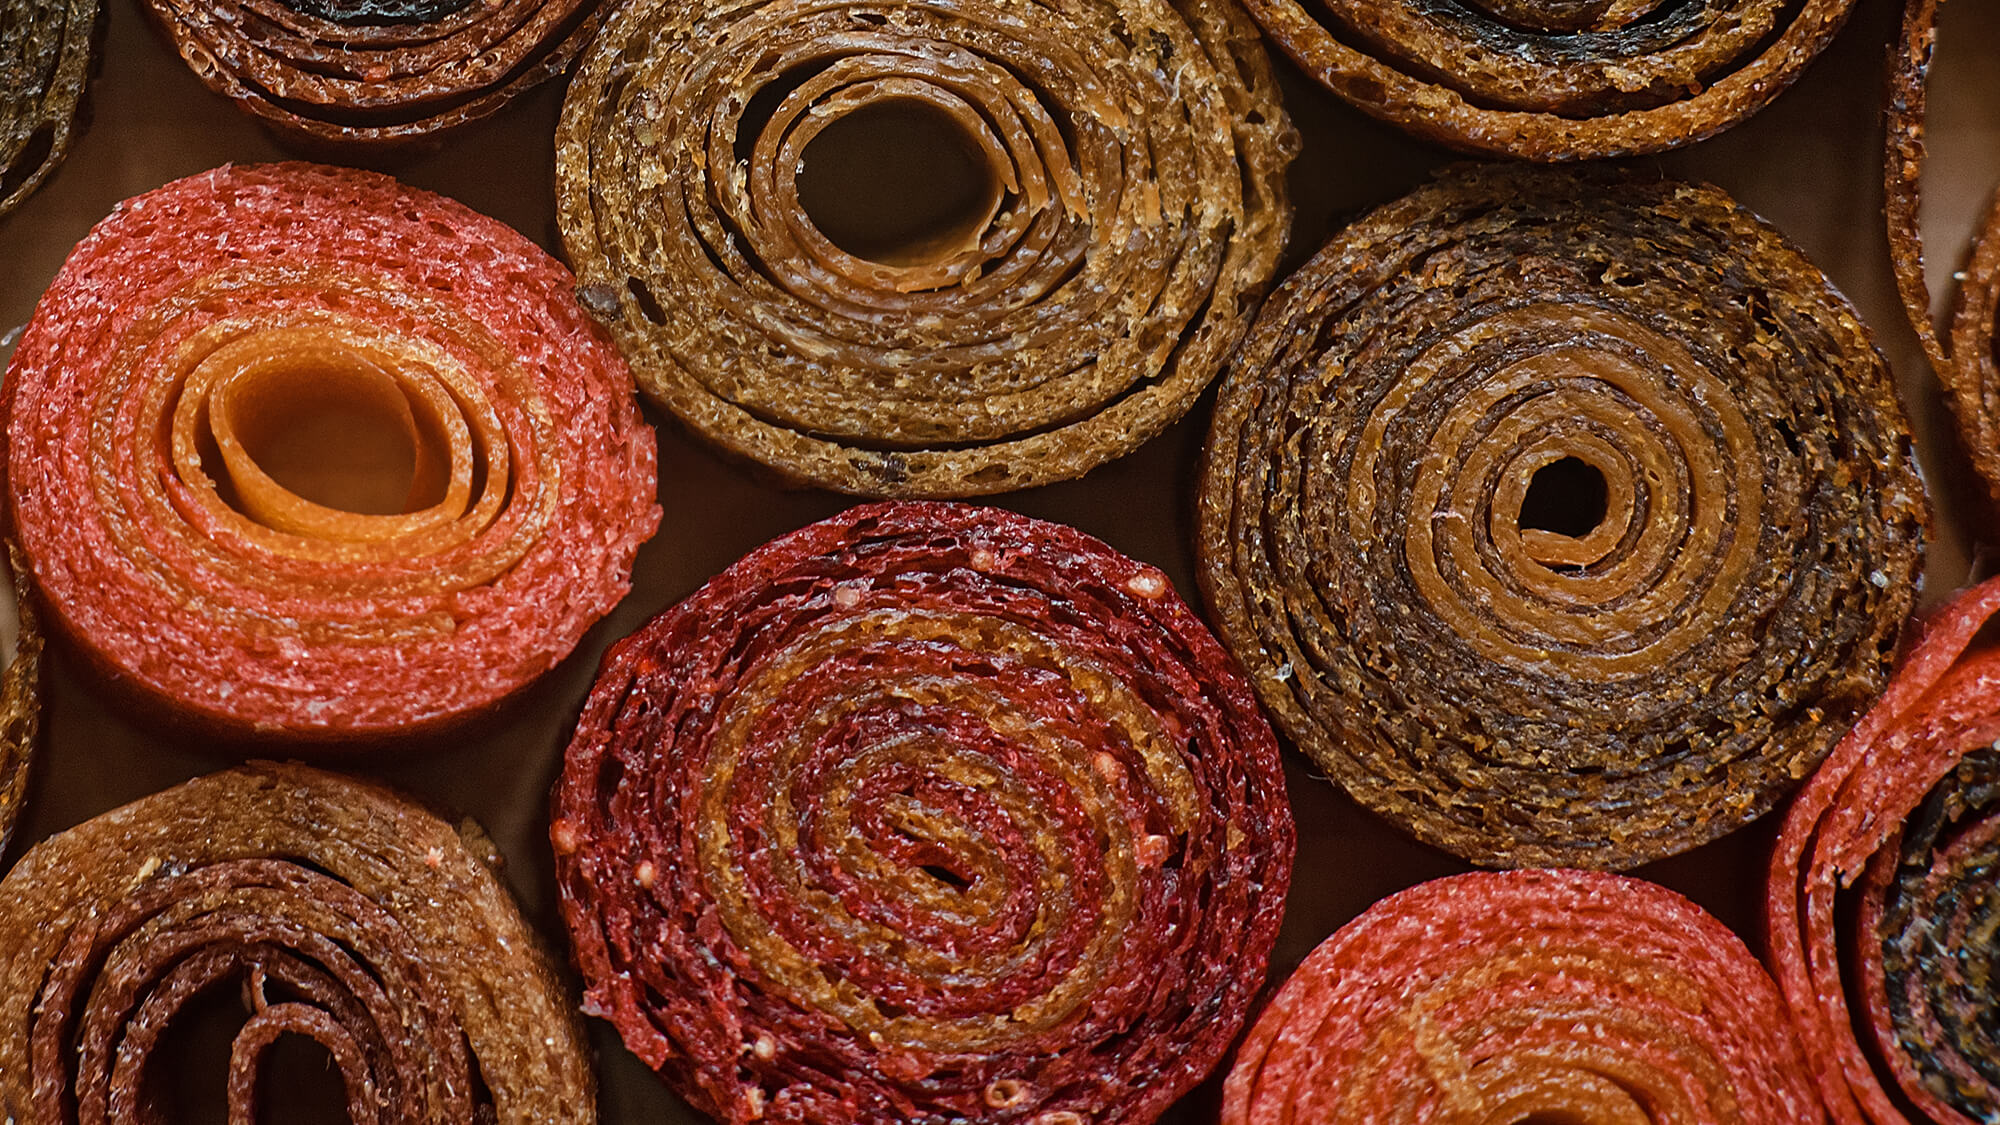 A grouping of fruit leathers made from different fruits